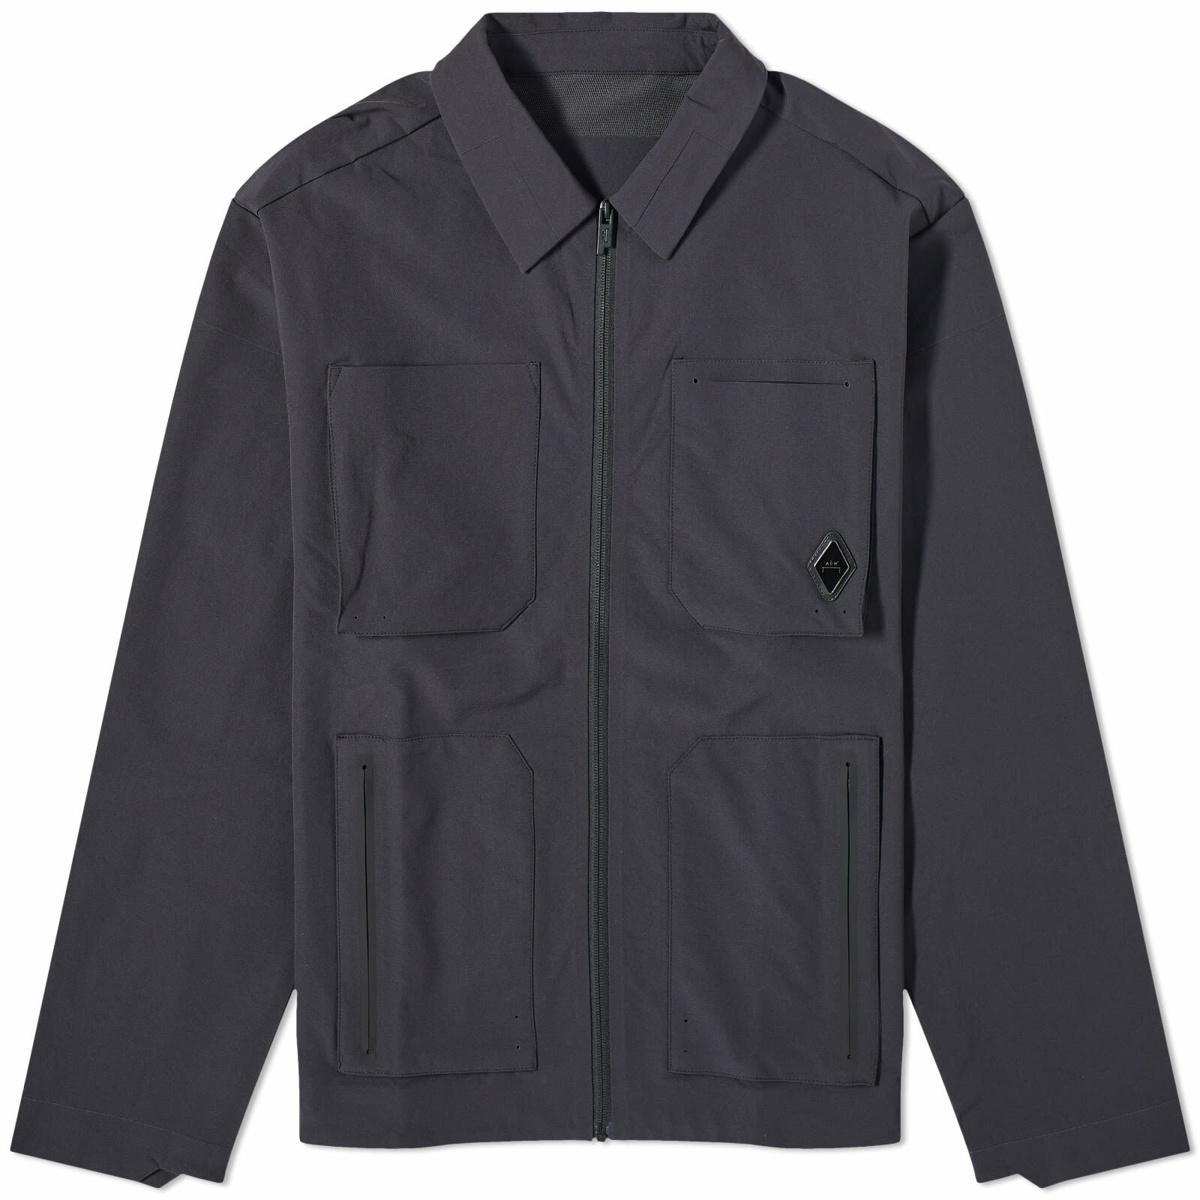 A-COLD-WALL* Men's Technical Overshirt in Black A-Cold-Wall*